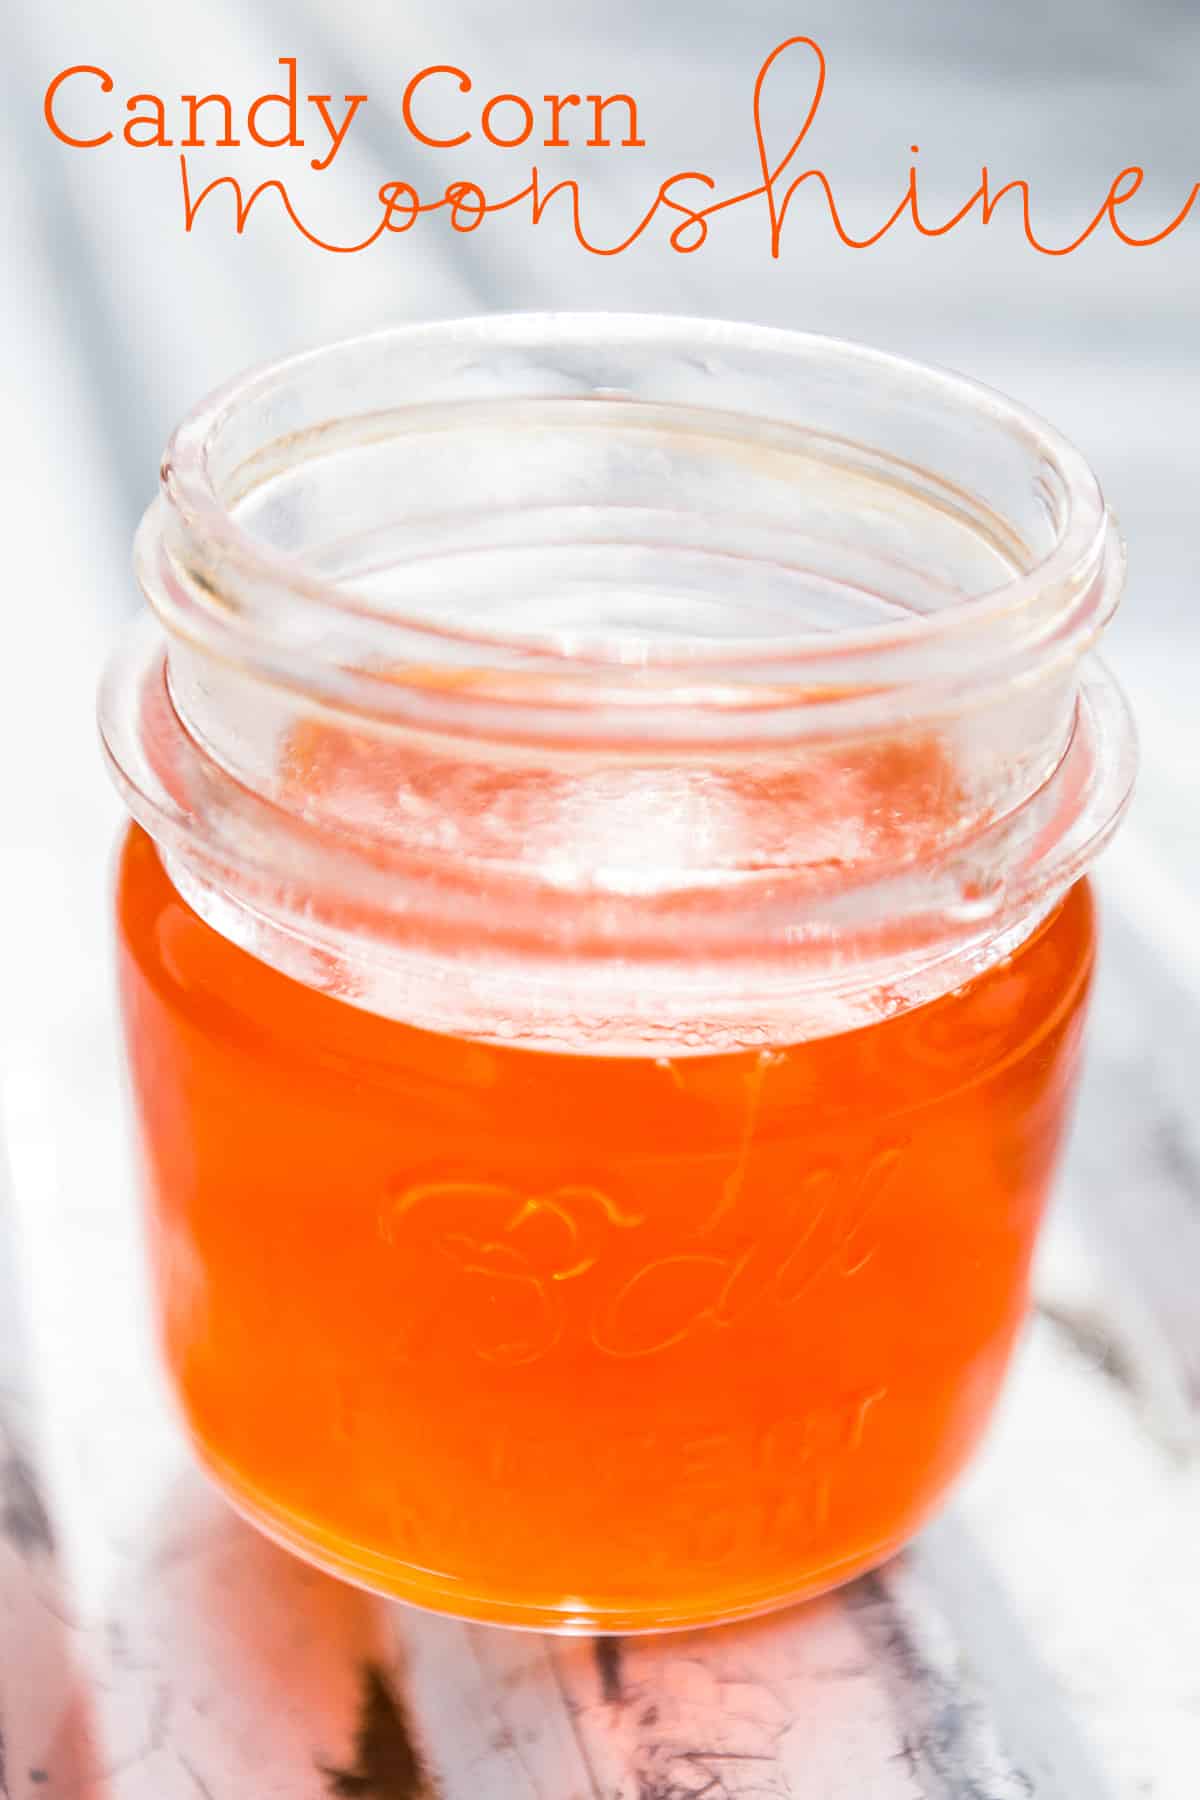 orange moonshine in a jar with candy corn around it